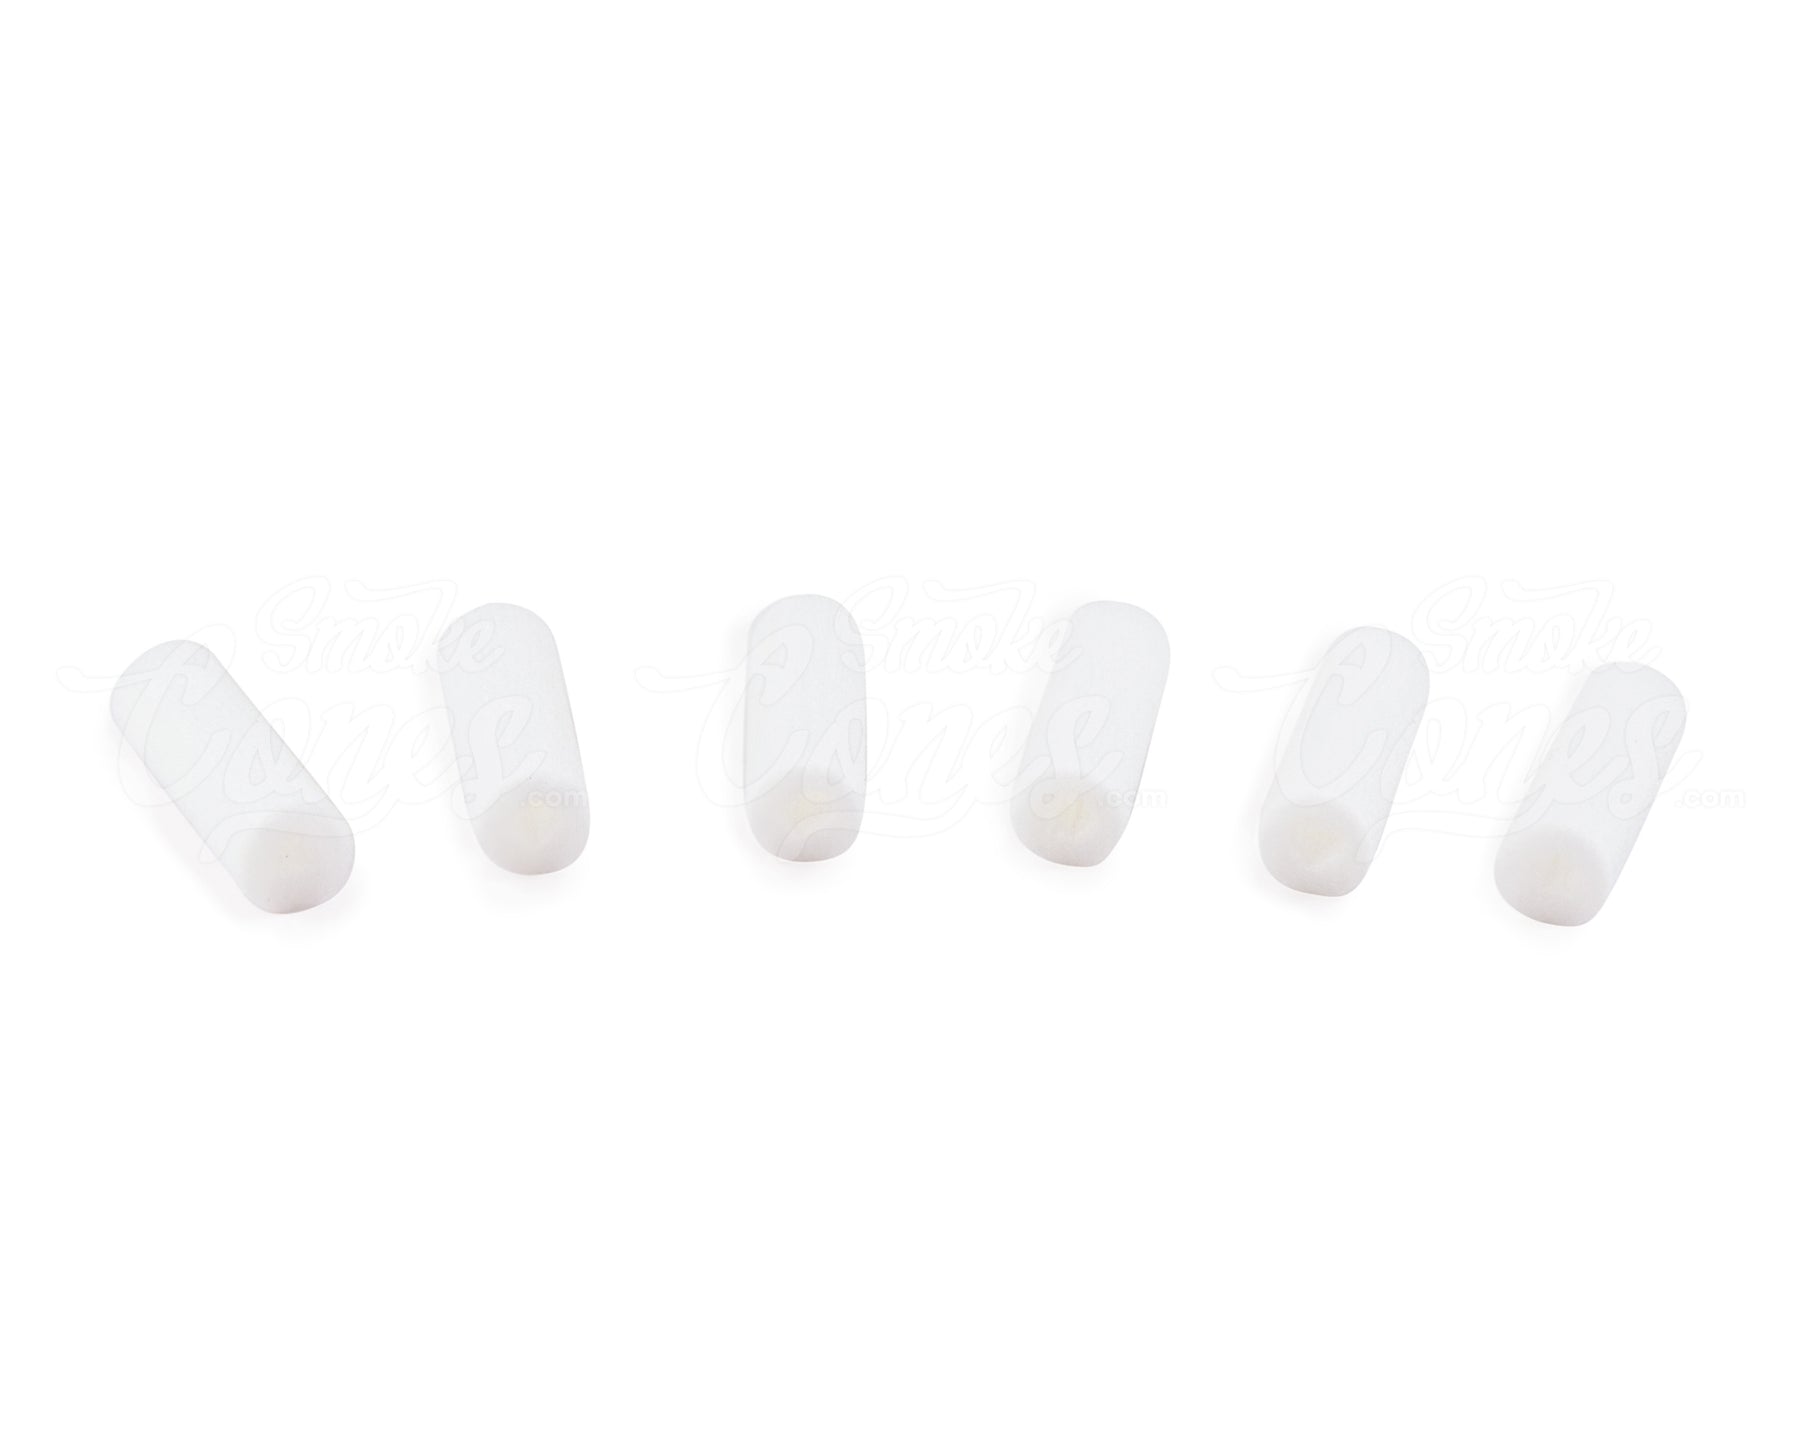 FLOWTIPS 20mm Hollow Shaped Premium Cotton Filter Tips 10/Box - 7